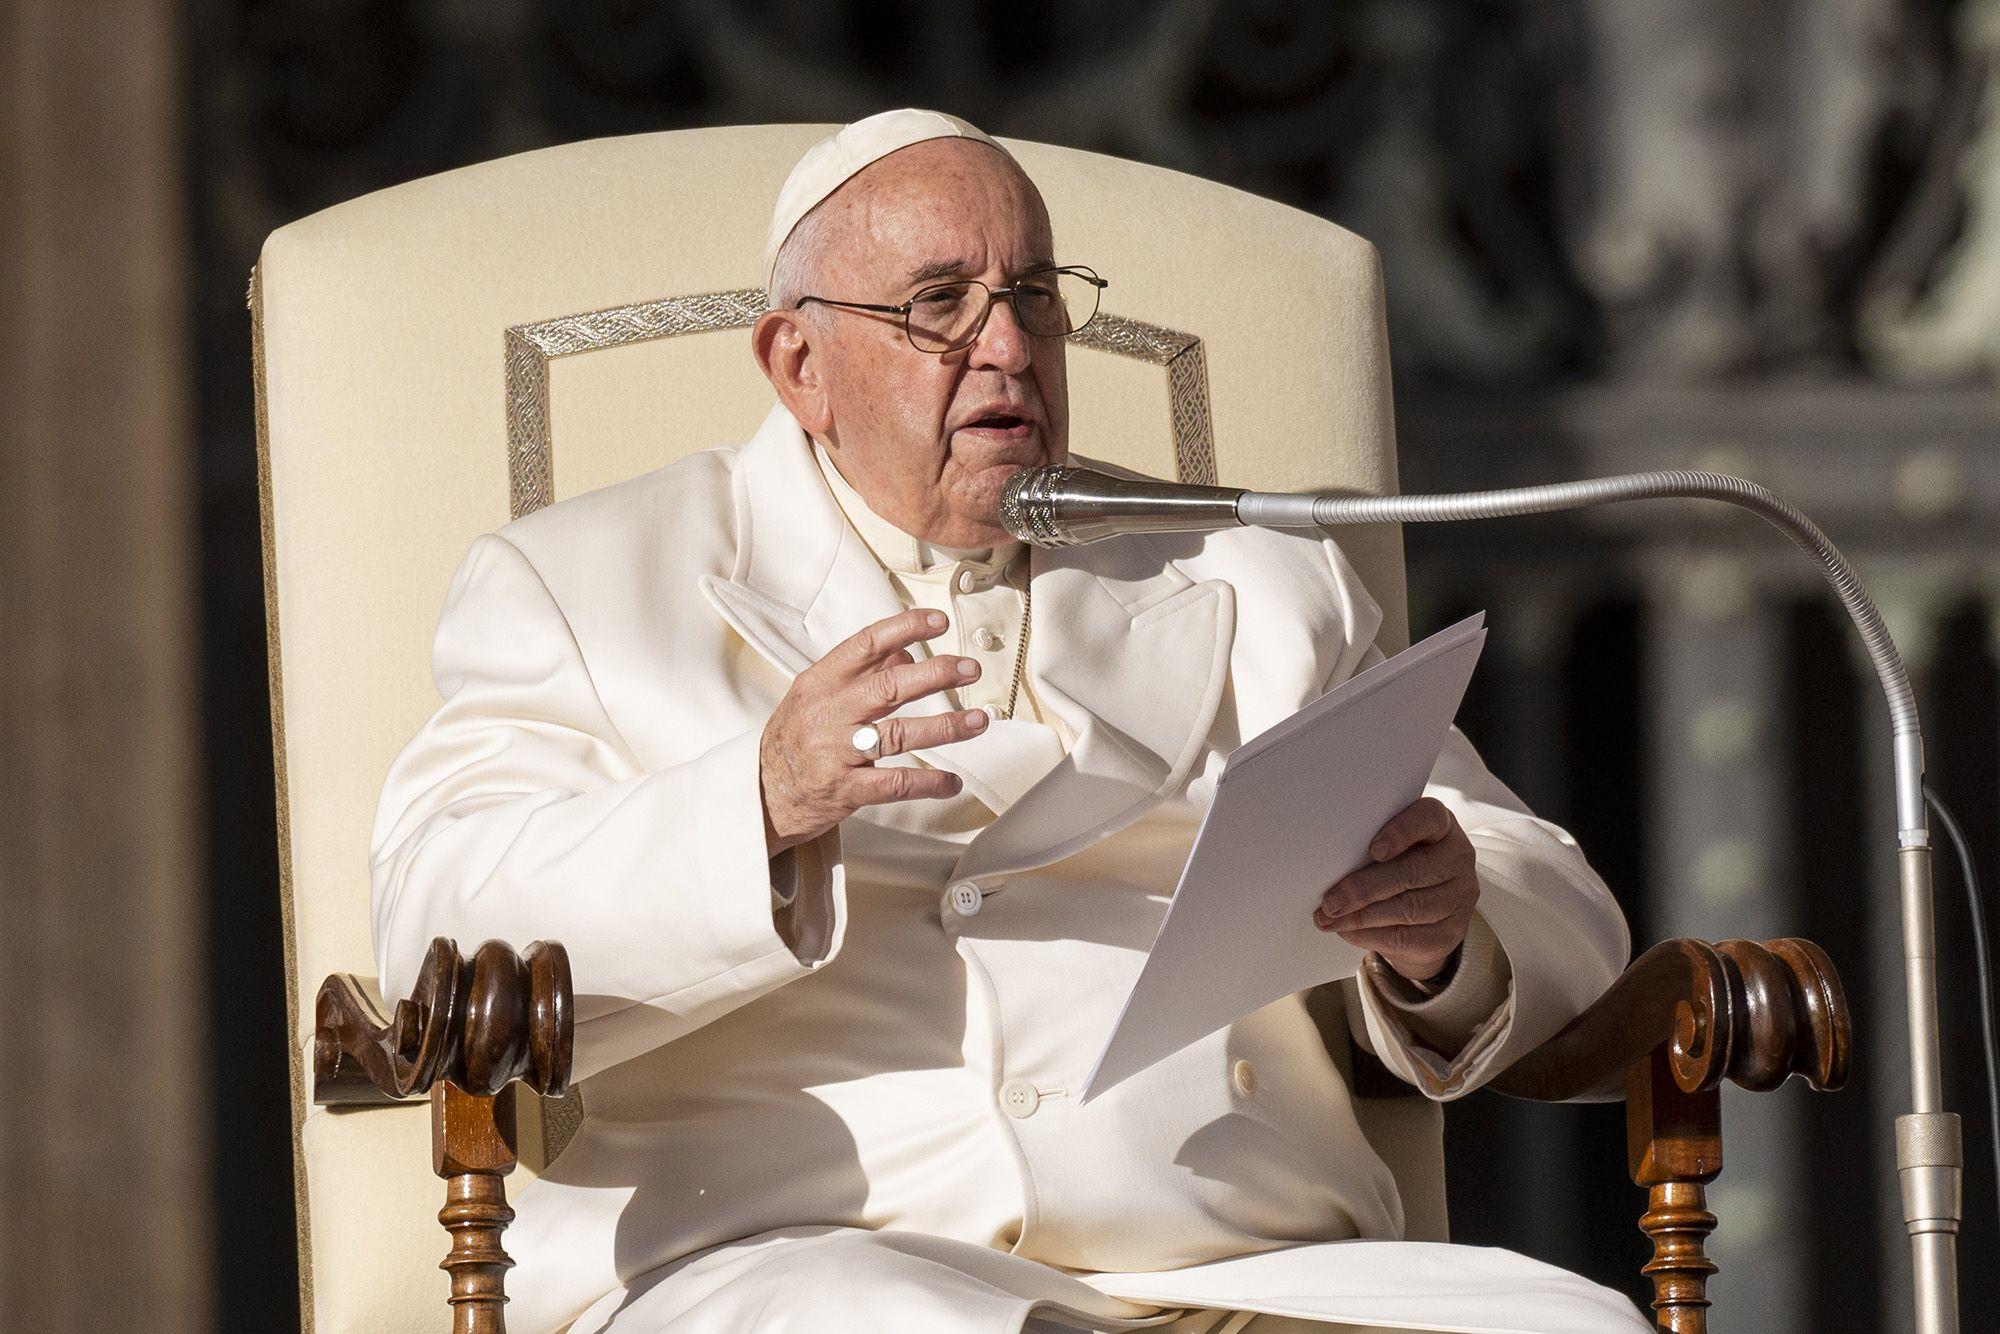 The Pope compared the actions of the Kremlin in Ukraine with the actions of Nazi Germany